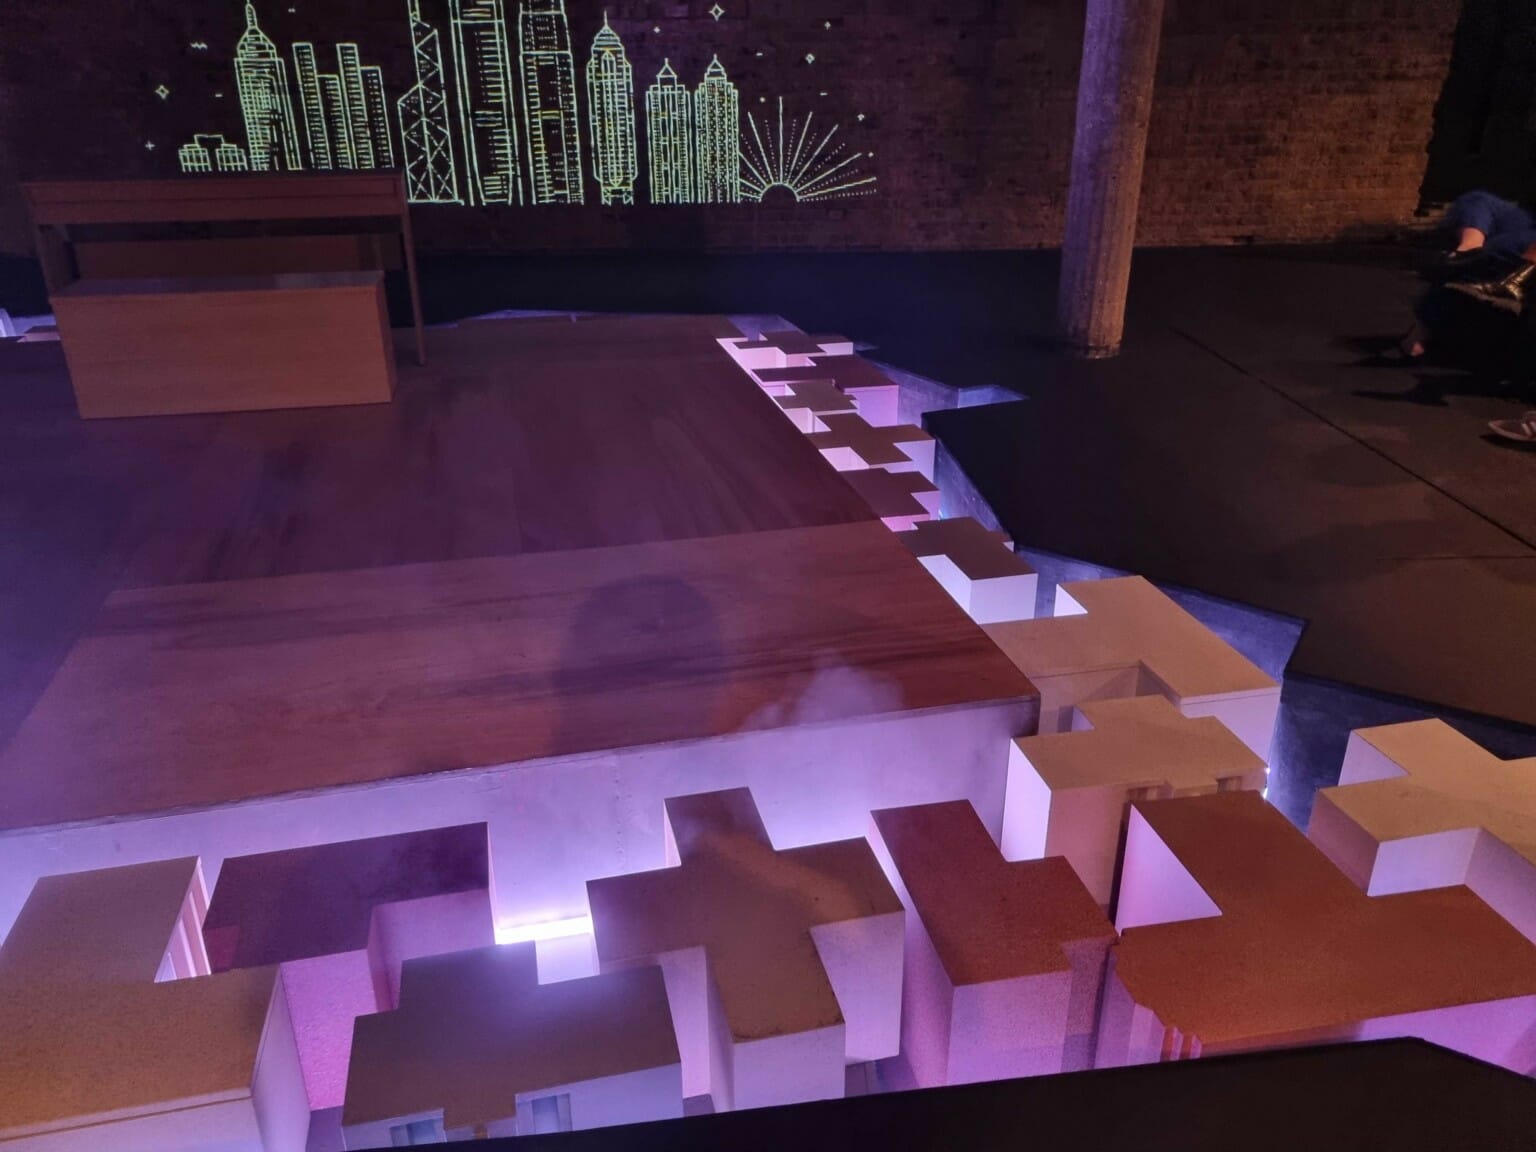 Liam Bunster's Set for A Playlist for the Revolution - A series of blocks recessed into a floor in the trench